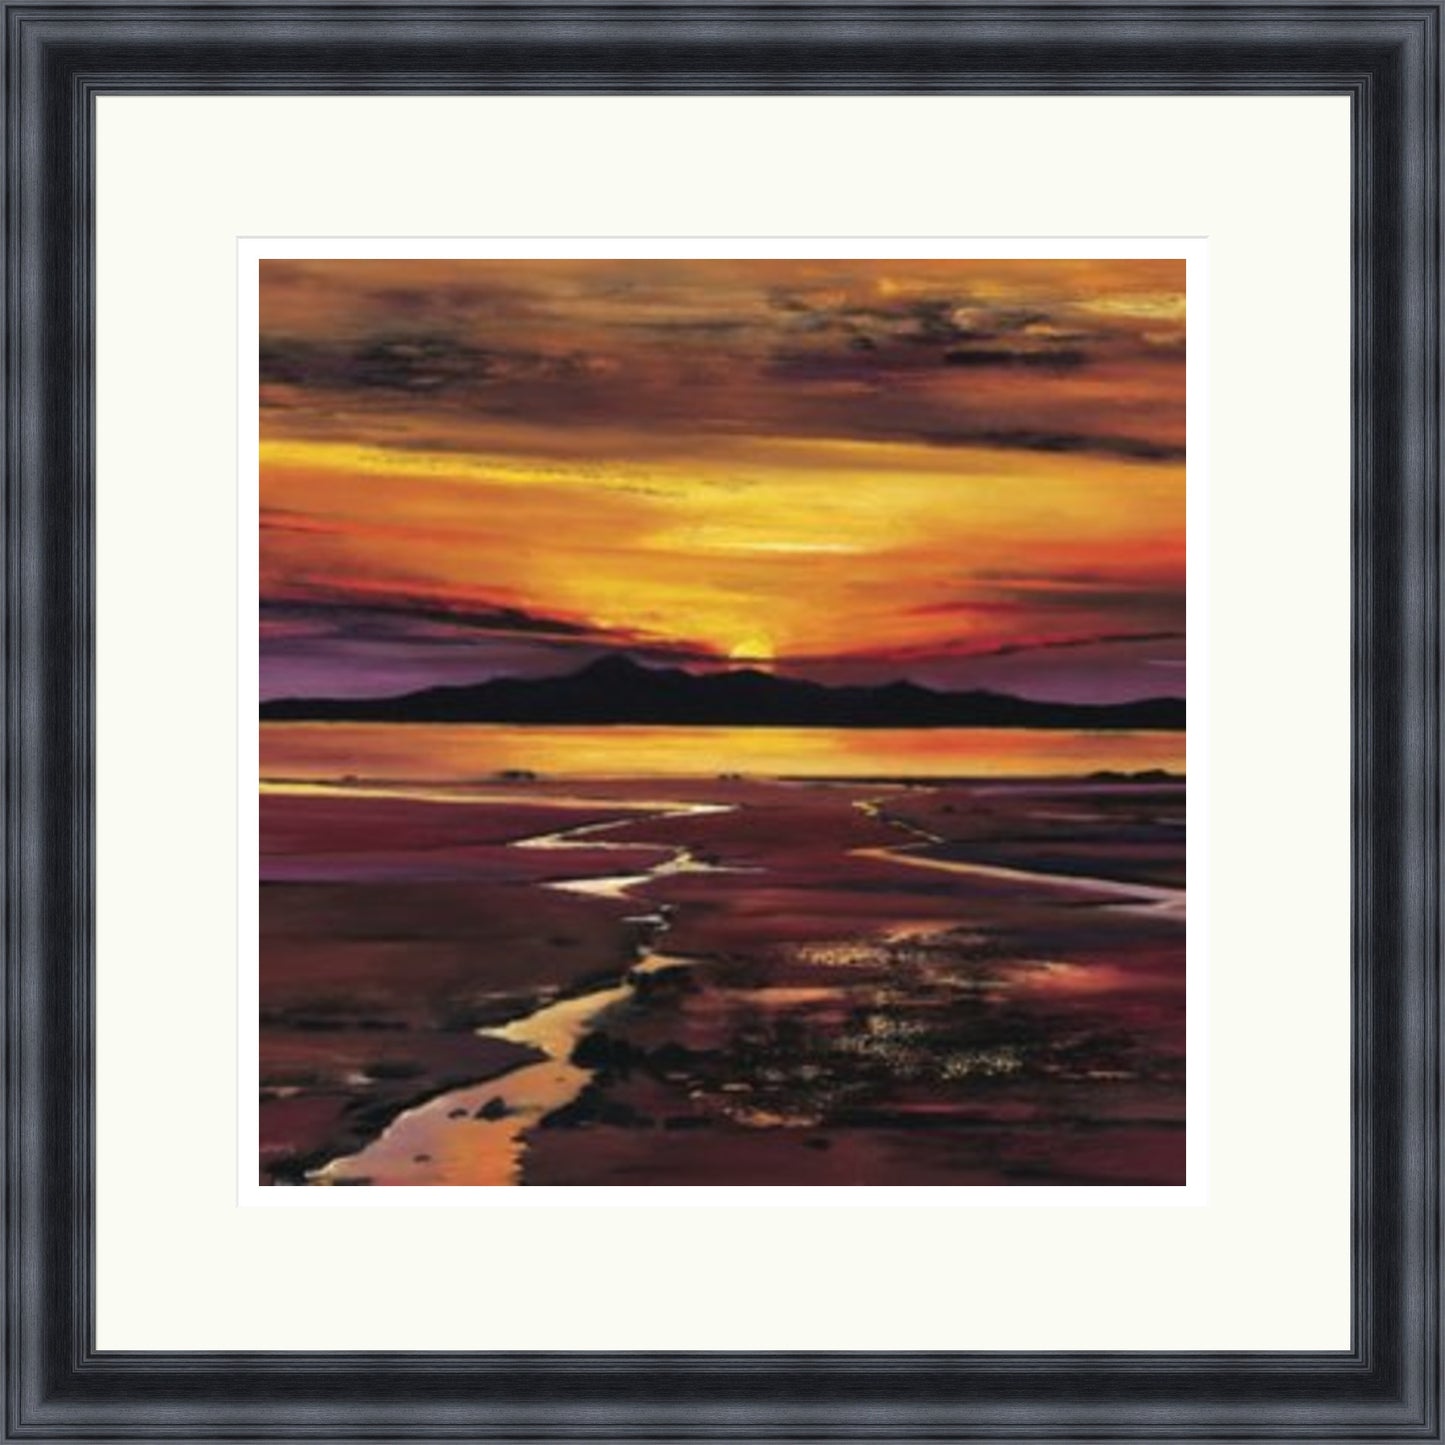 Last One - Fading Sun, Arran (Signed Limited Edition) by Davy Brown